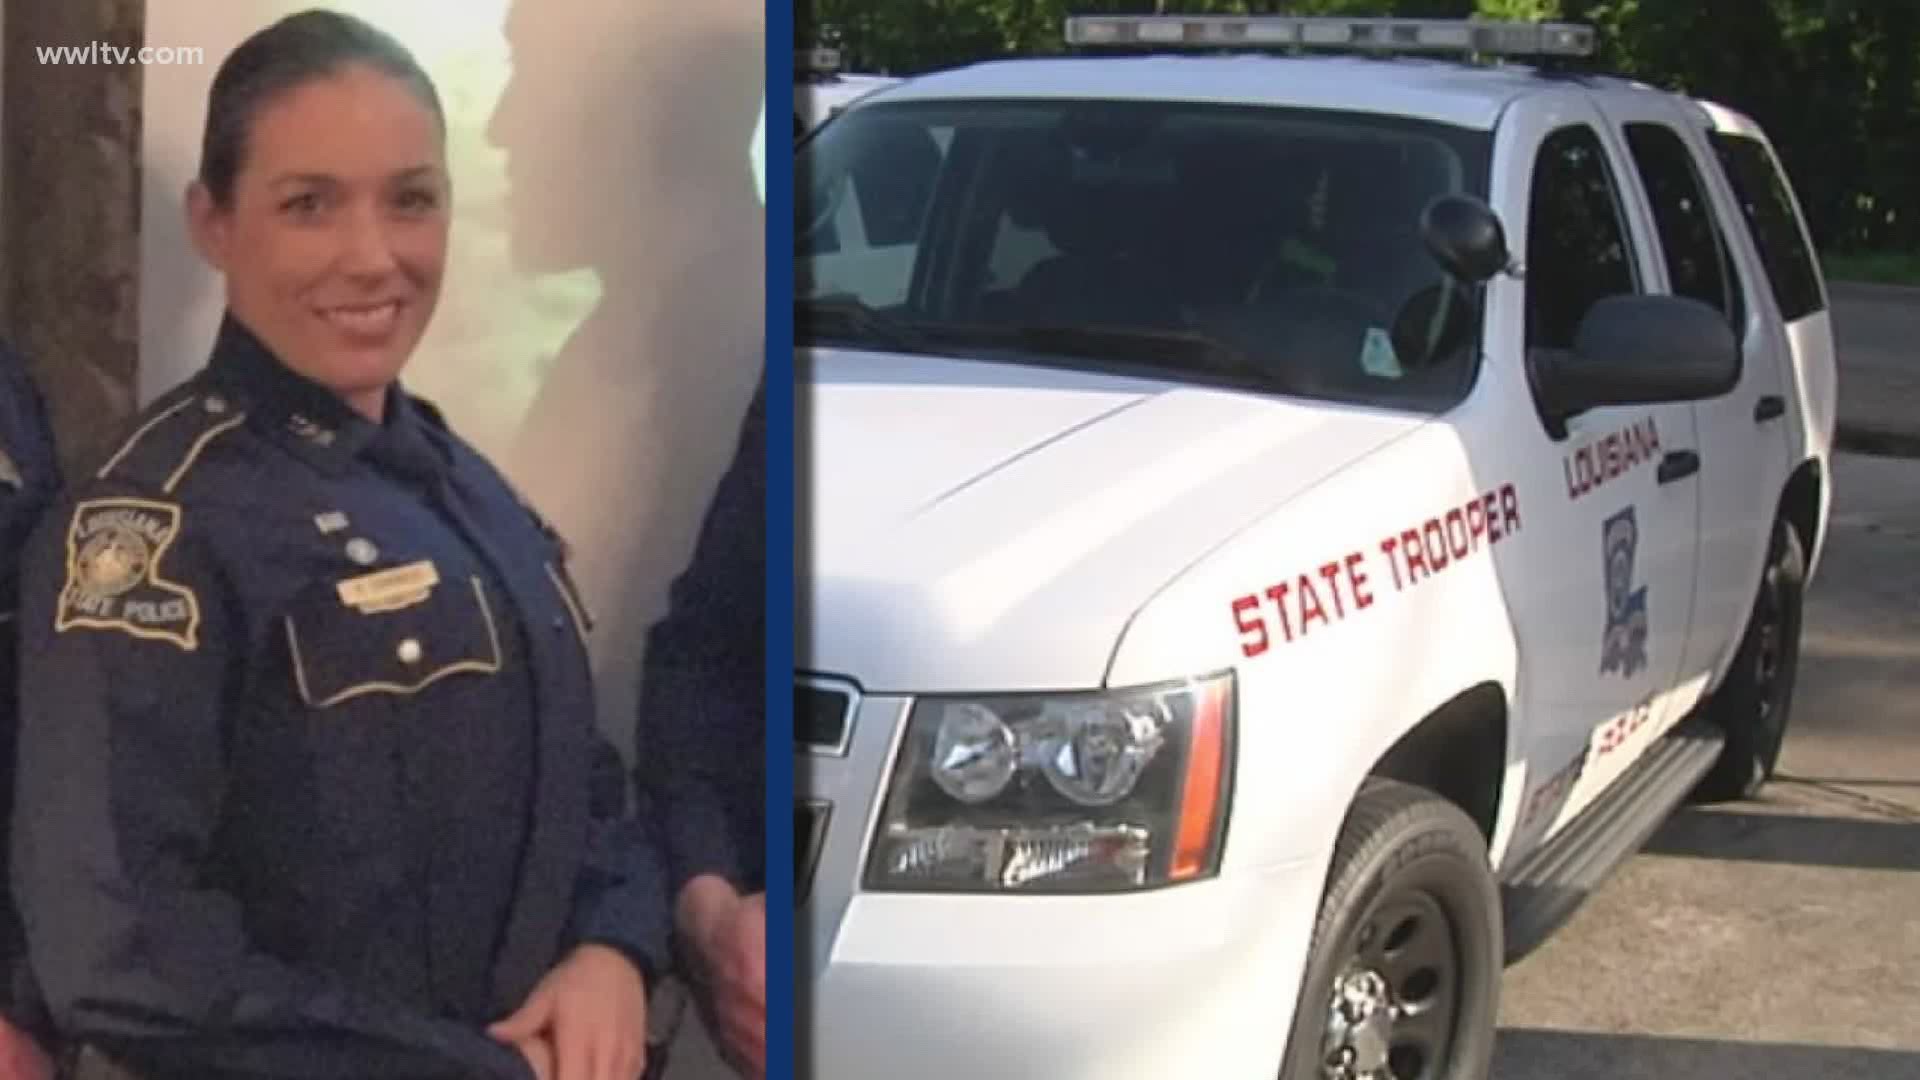 A state police news release said Trooper Kasha Domingue was indicted Thursday by an East Baton Rouge Parish grand jury.